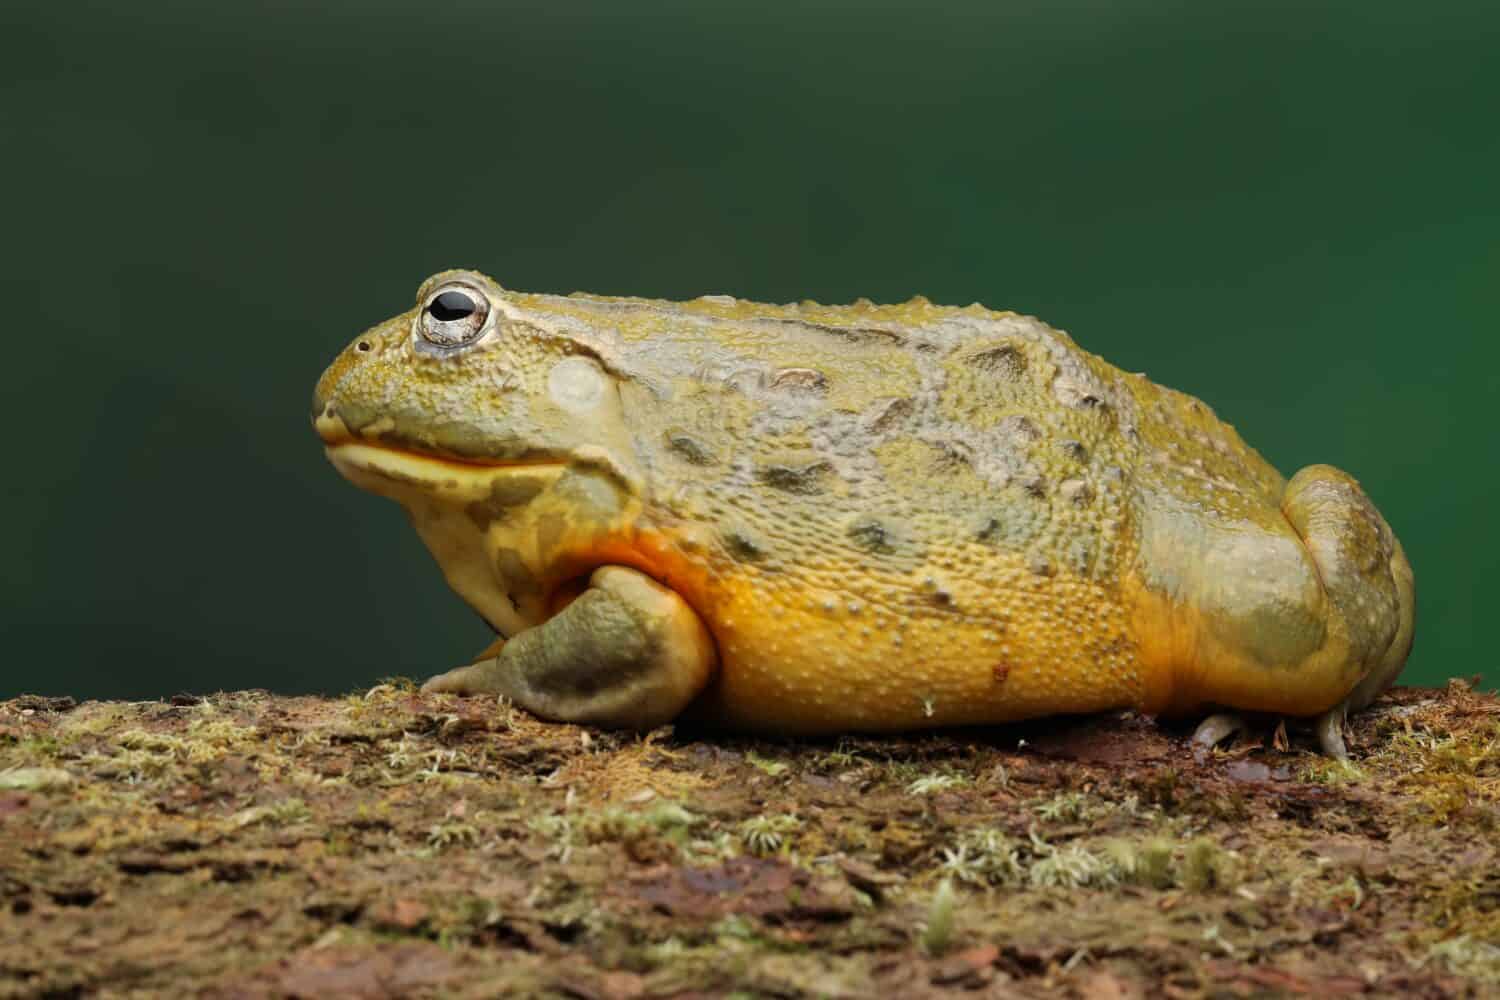 The African Giant Bullfrog (Pyxicephalus adspersus) is the world's second largest species of frog after the goliath frog.